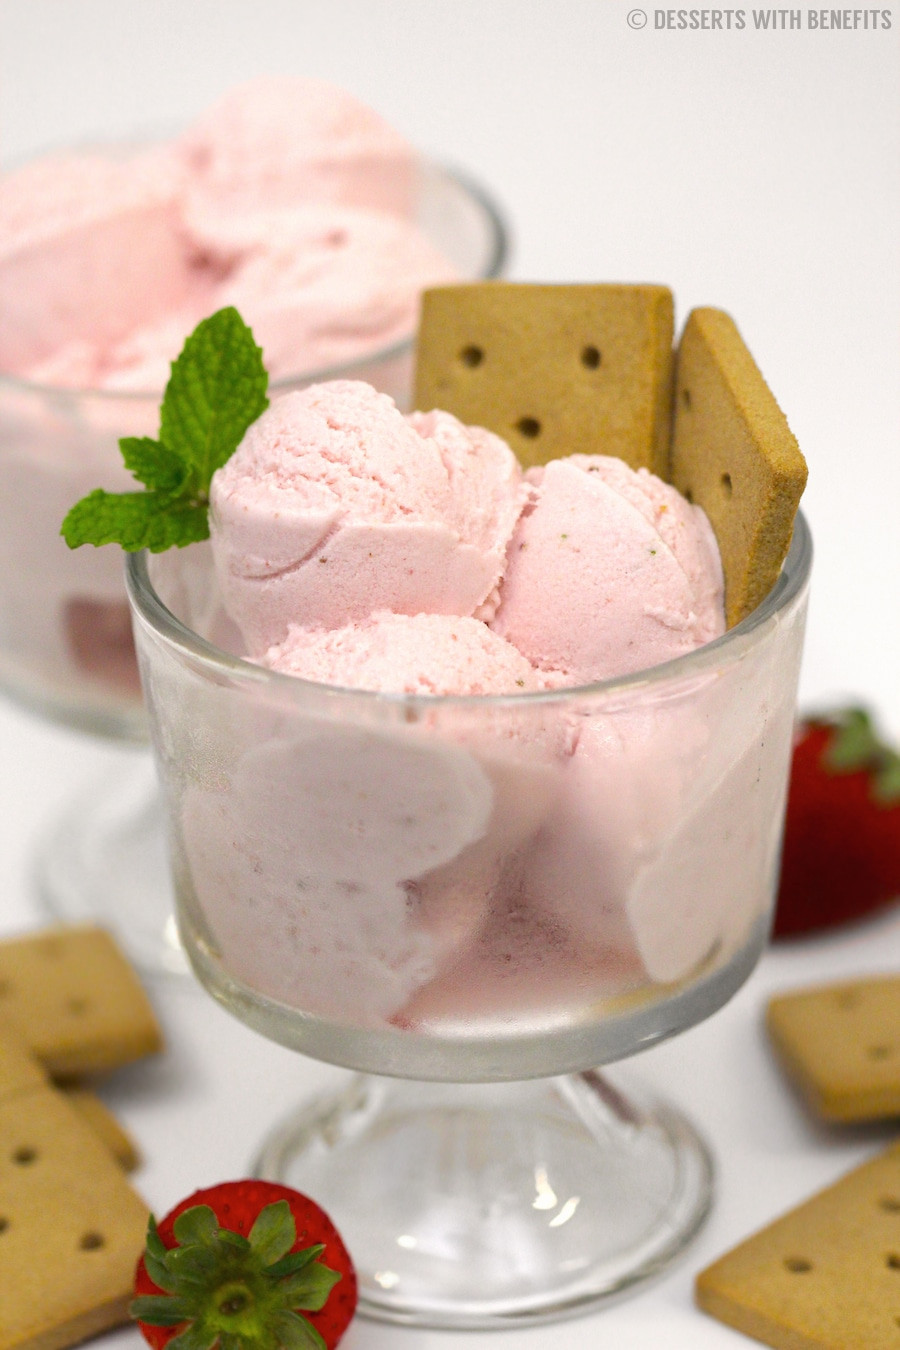 Low Sugar Low Fat Desserts
 Healthy Strawberries and Cream Ice Cream sugar free low fat